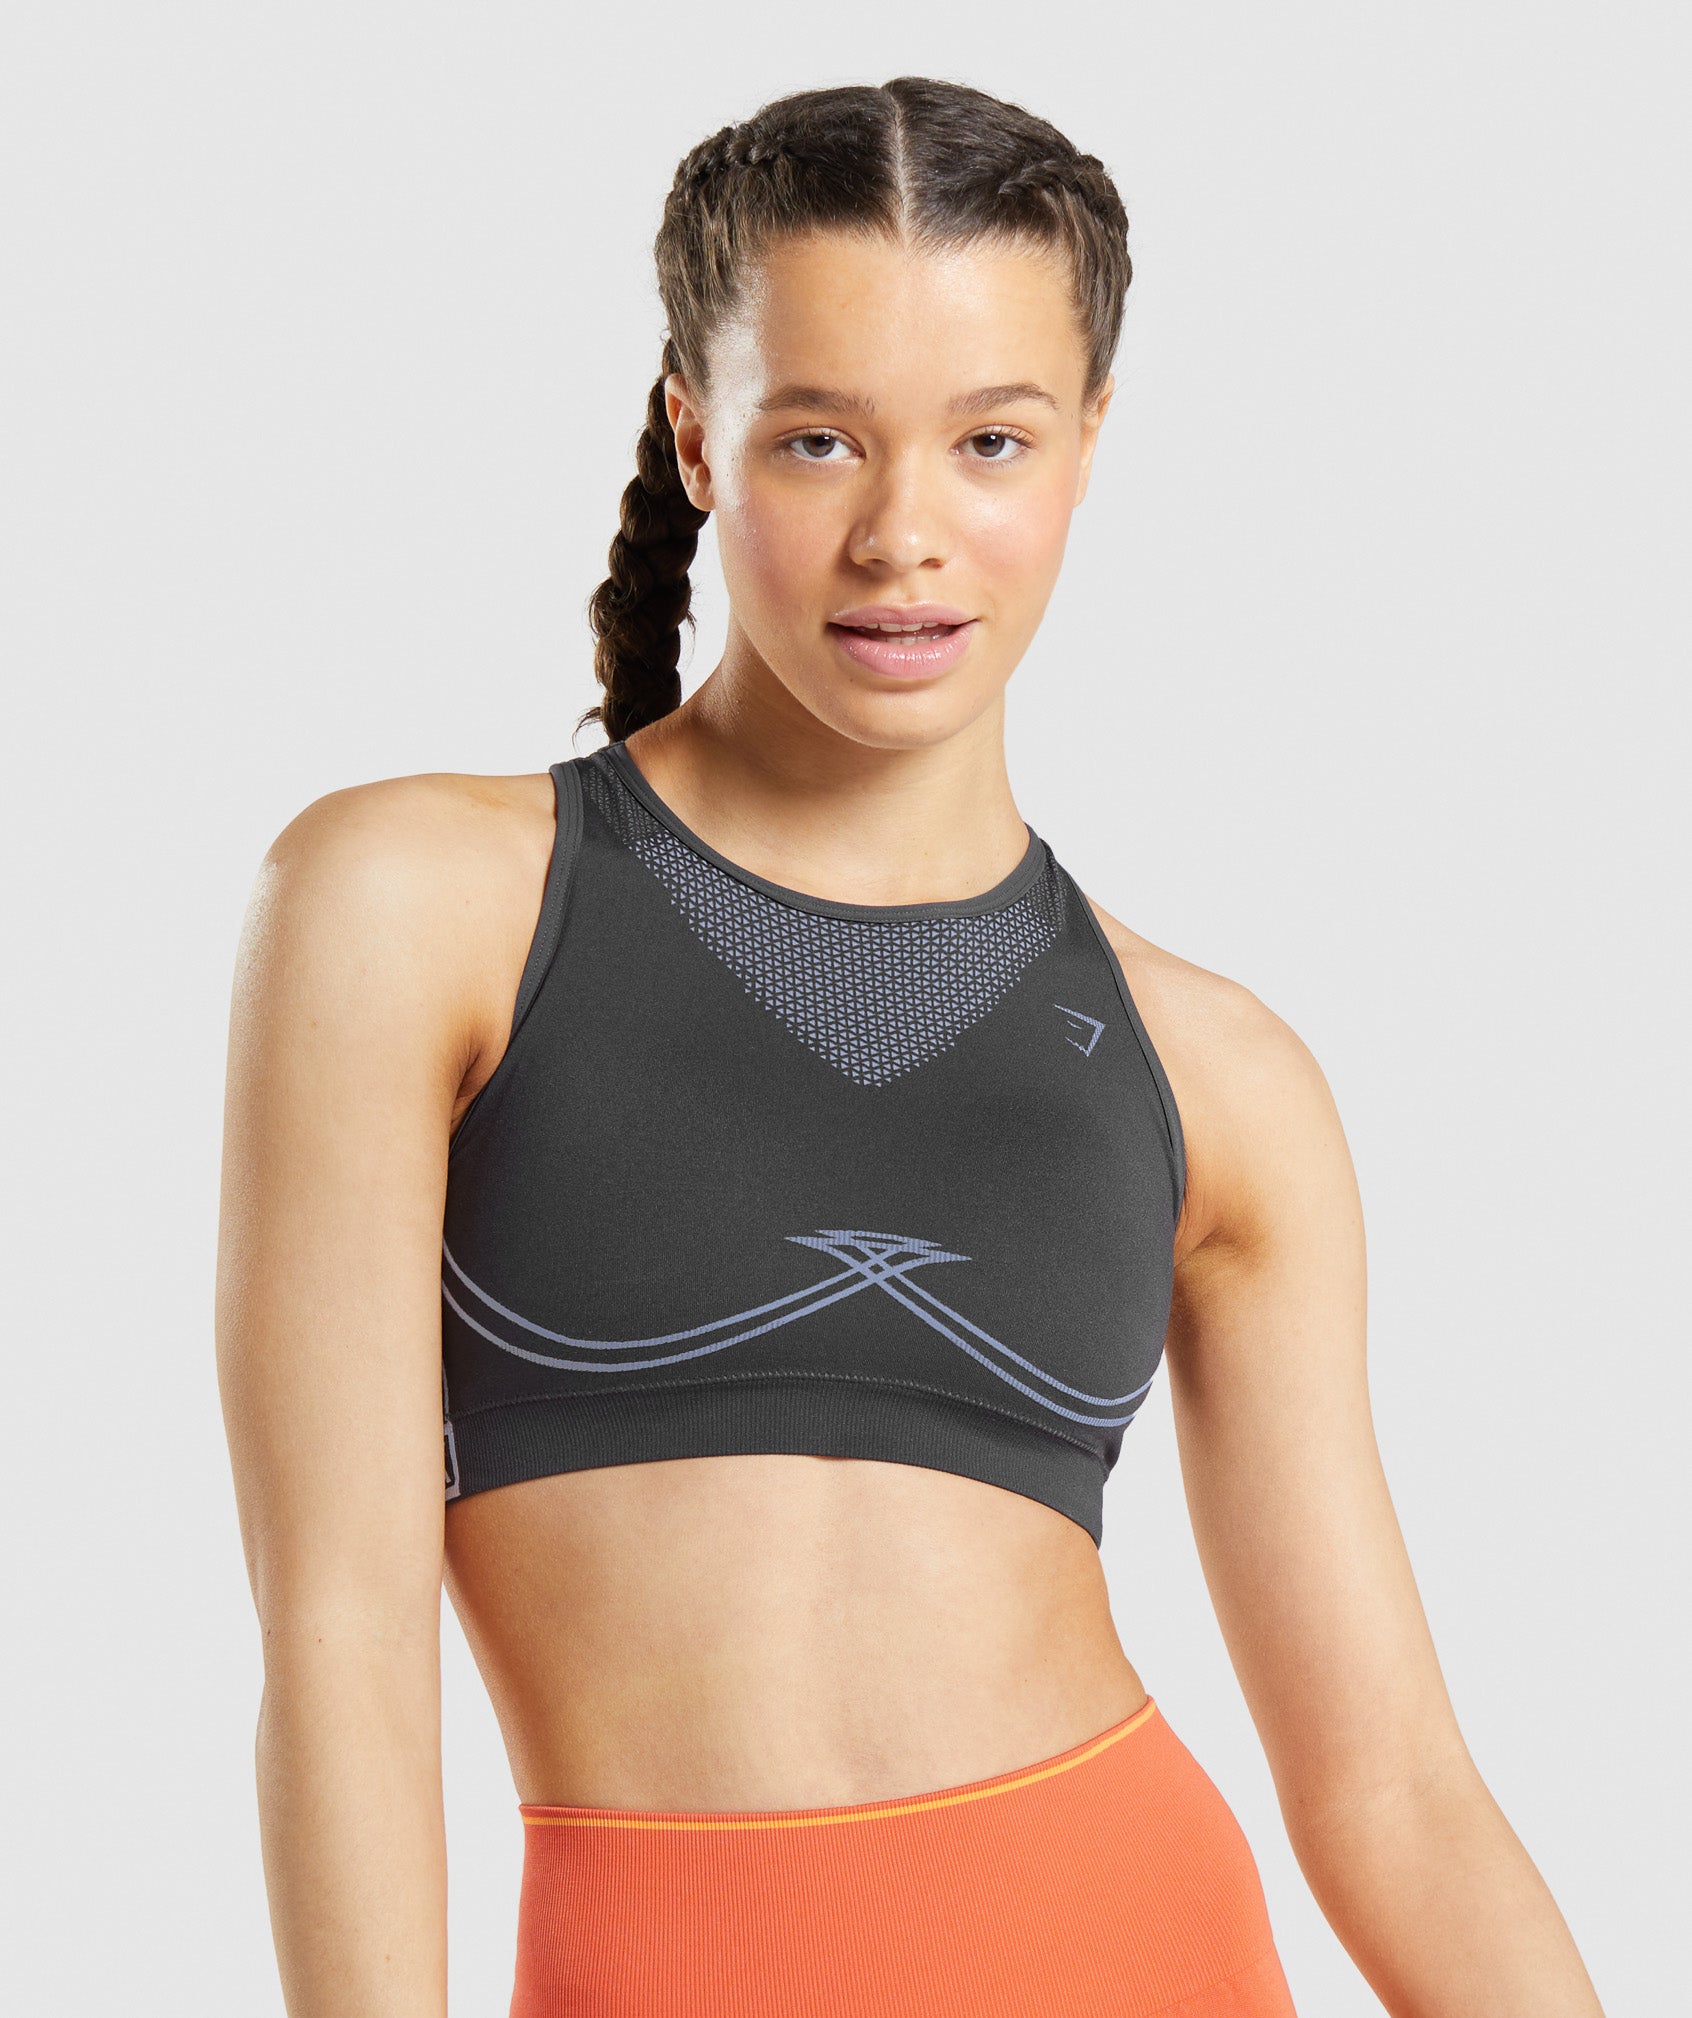 Does anyone own the gymshark apex seamless? : r/gymsnark